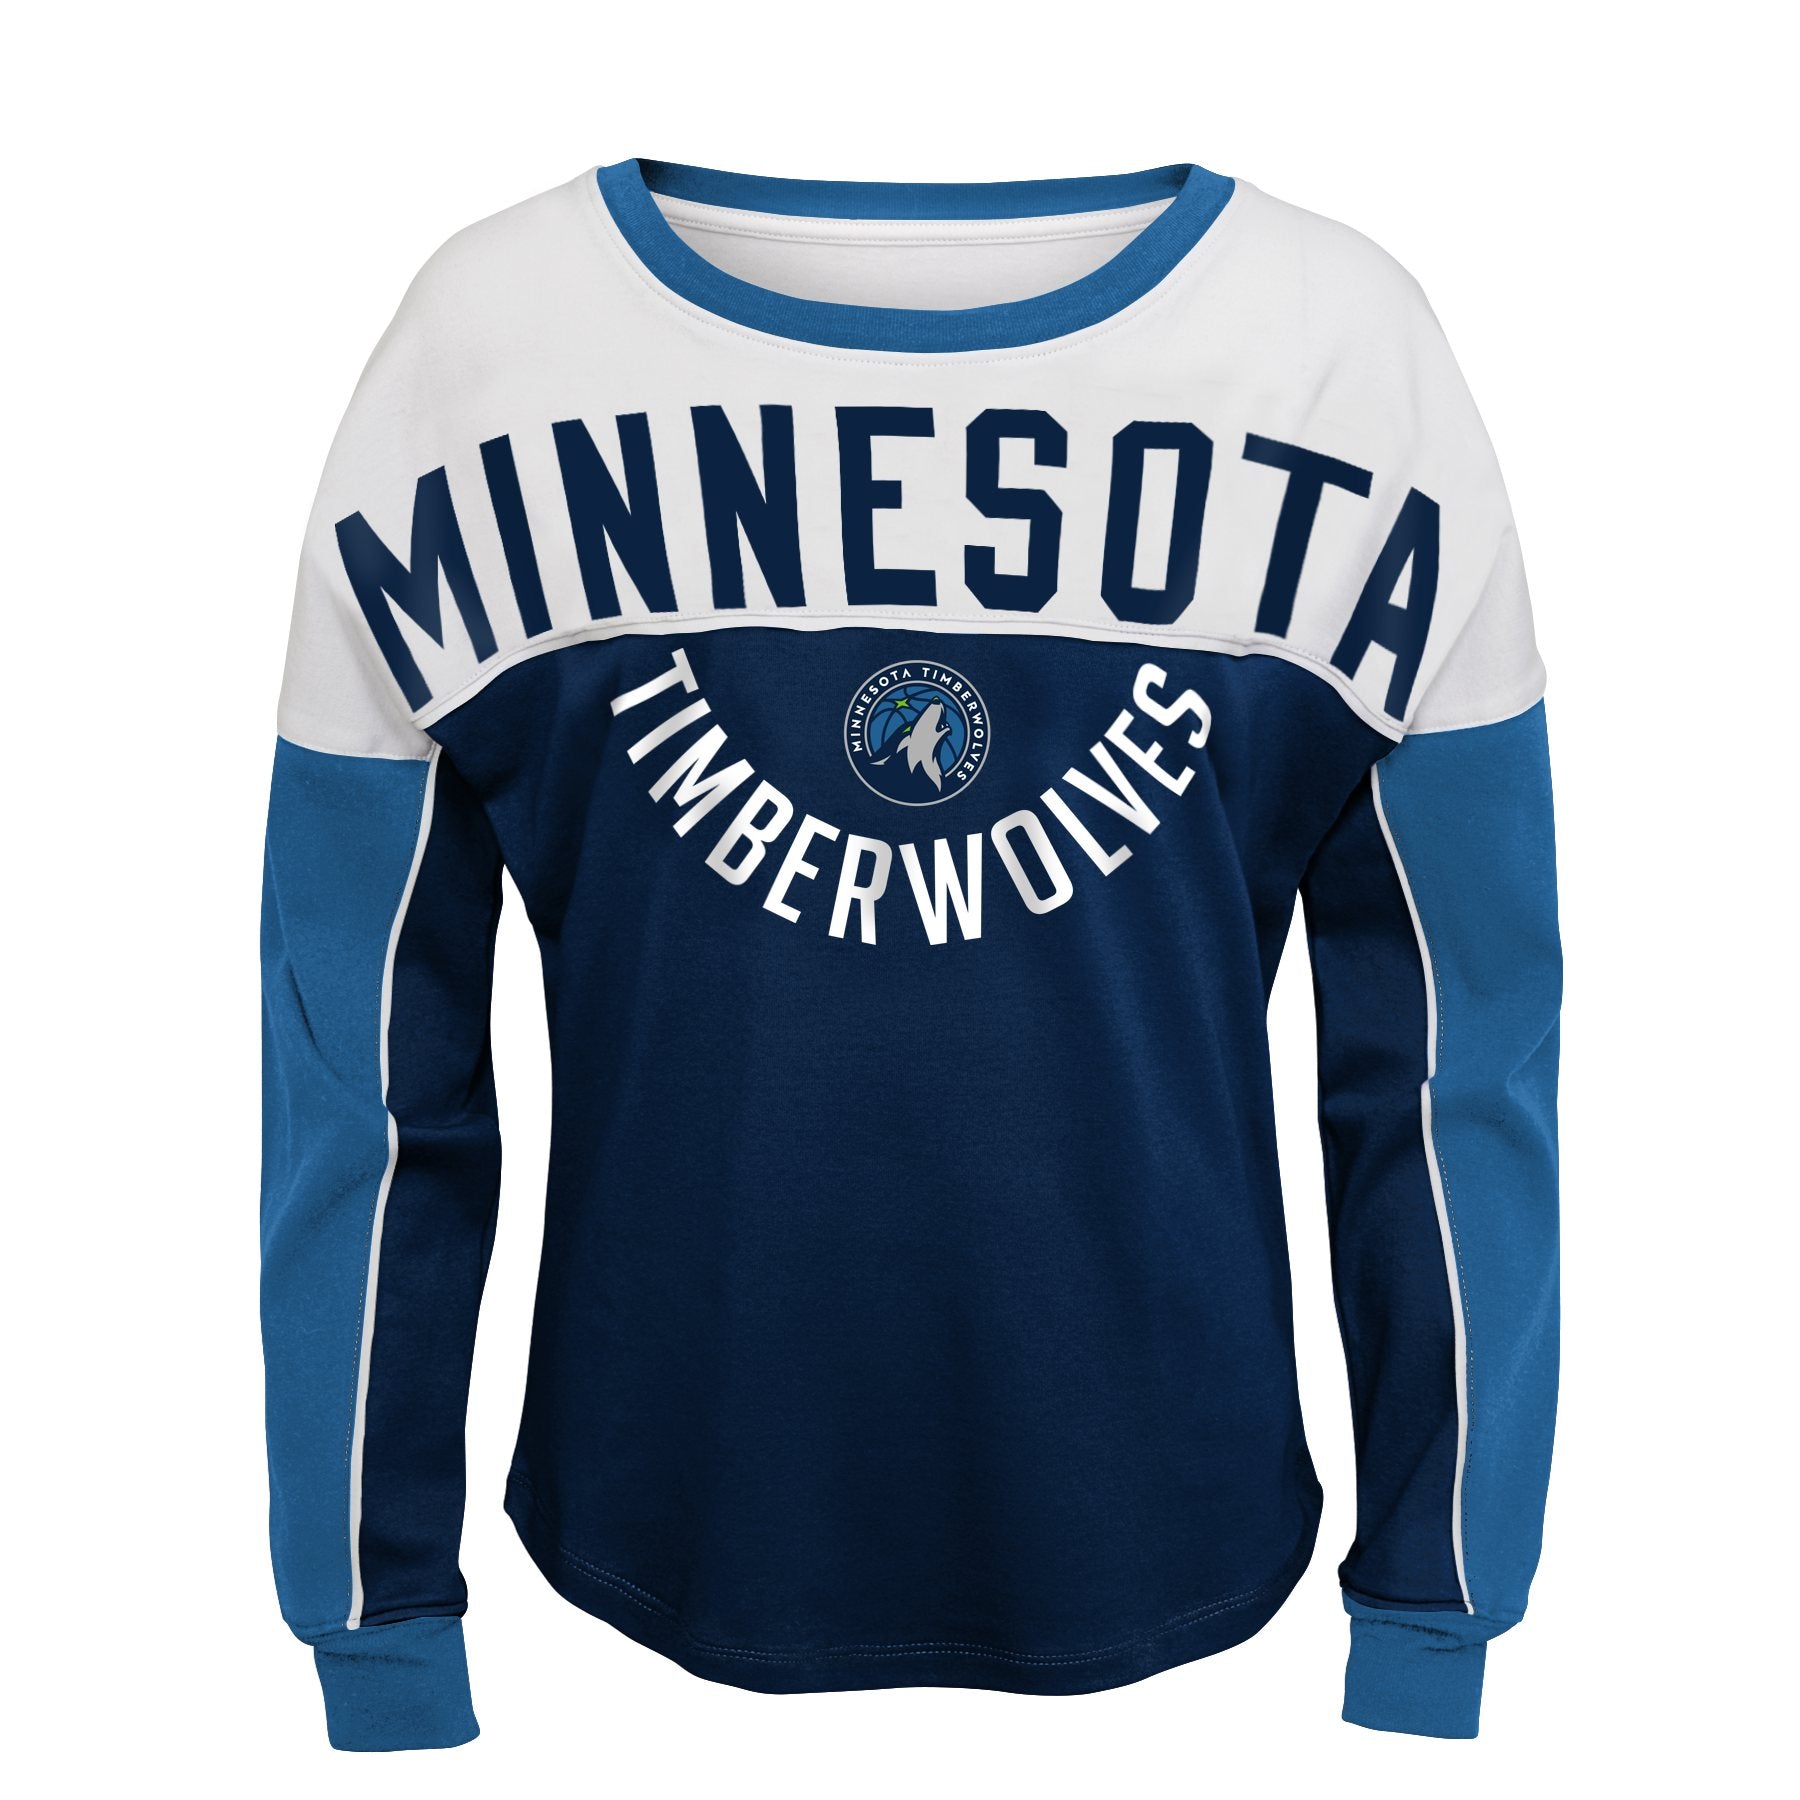 Timberwolves Team Store on X: We are officially open on the